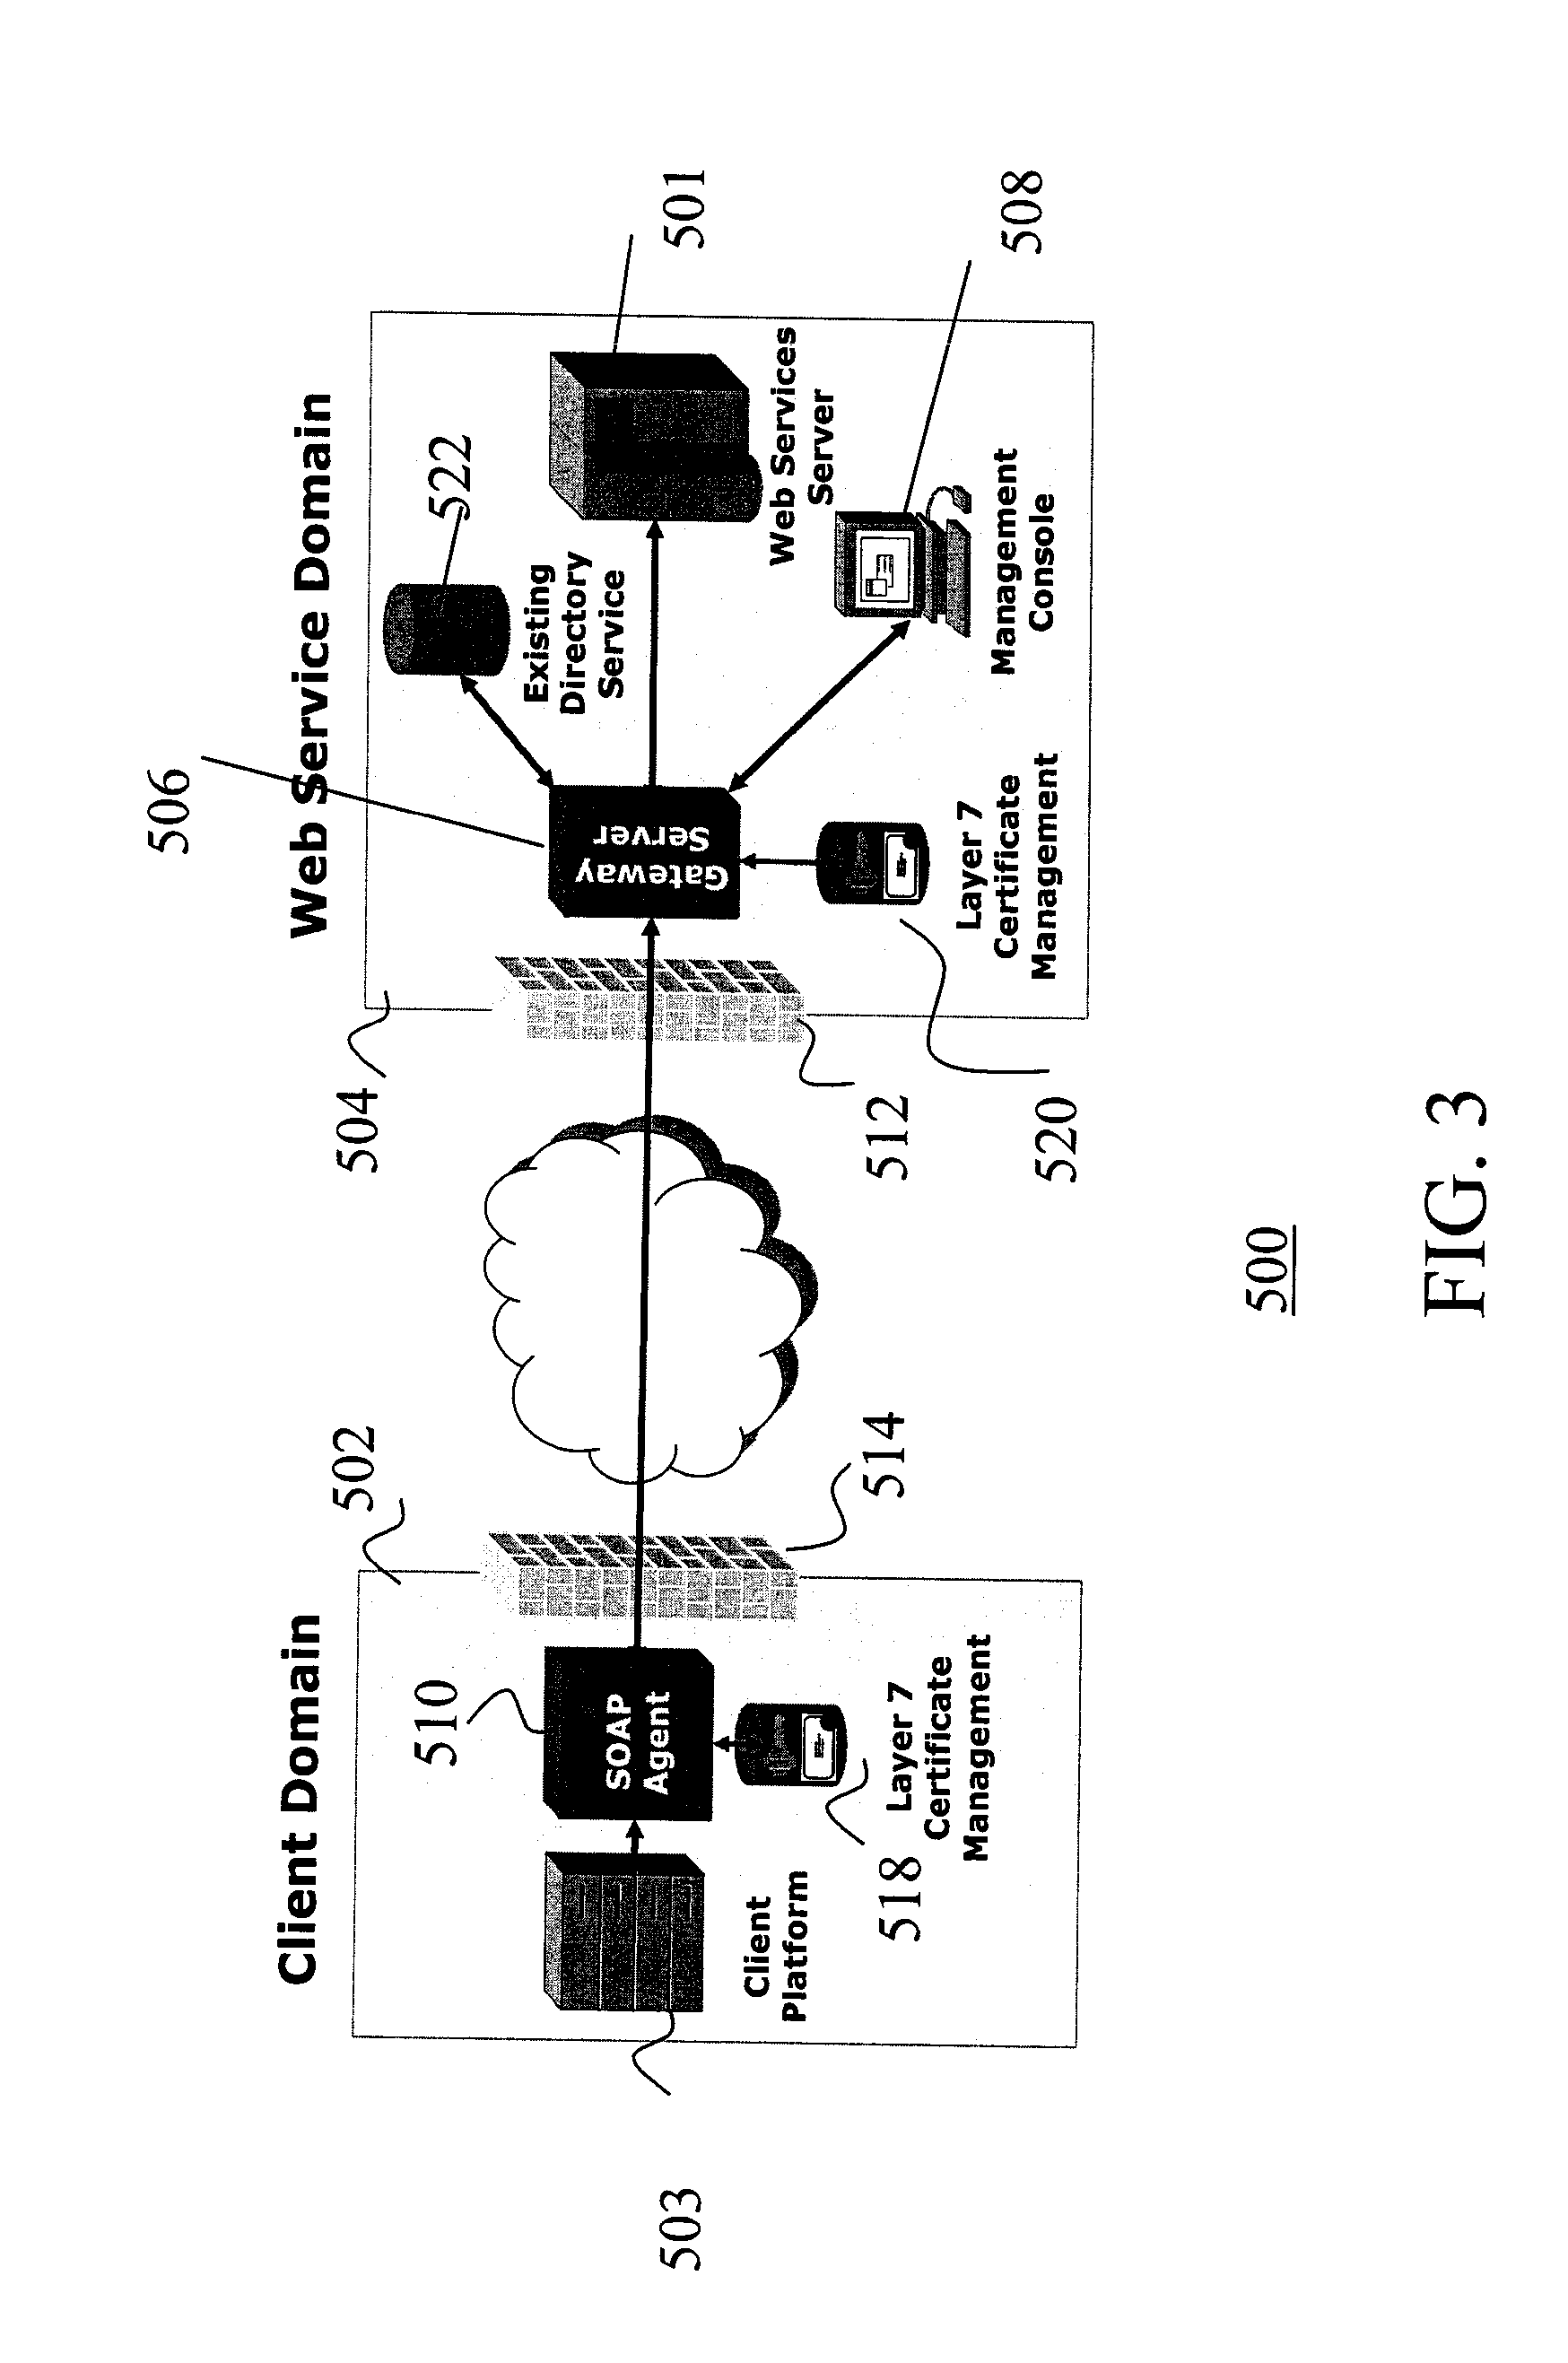 System and method for securing web services